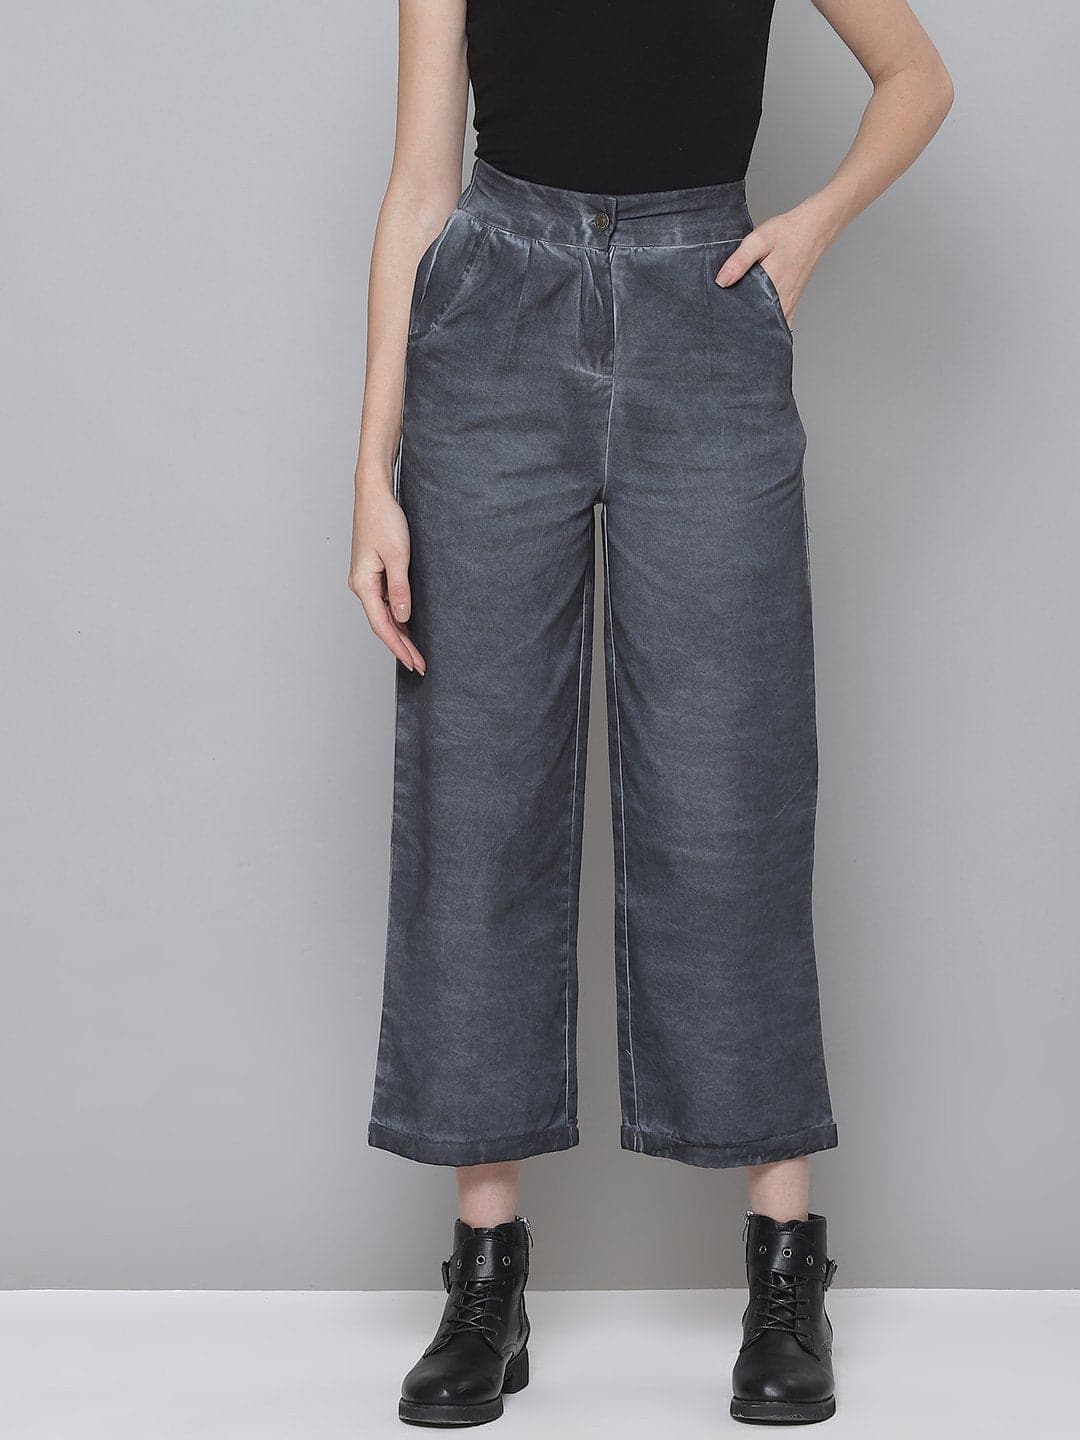 Buy Charcoal Belted Pants Online